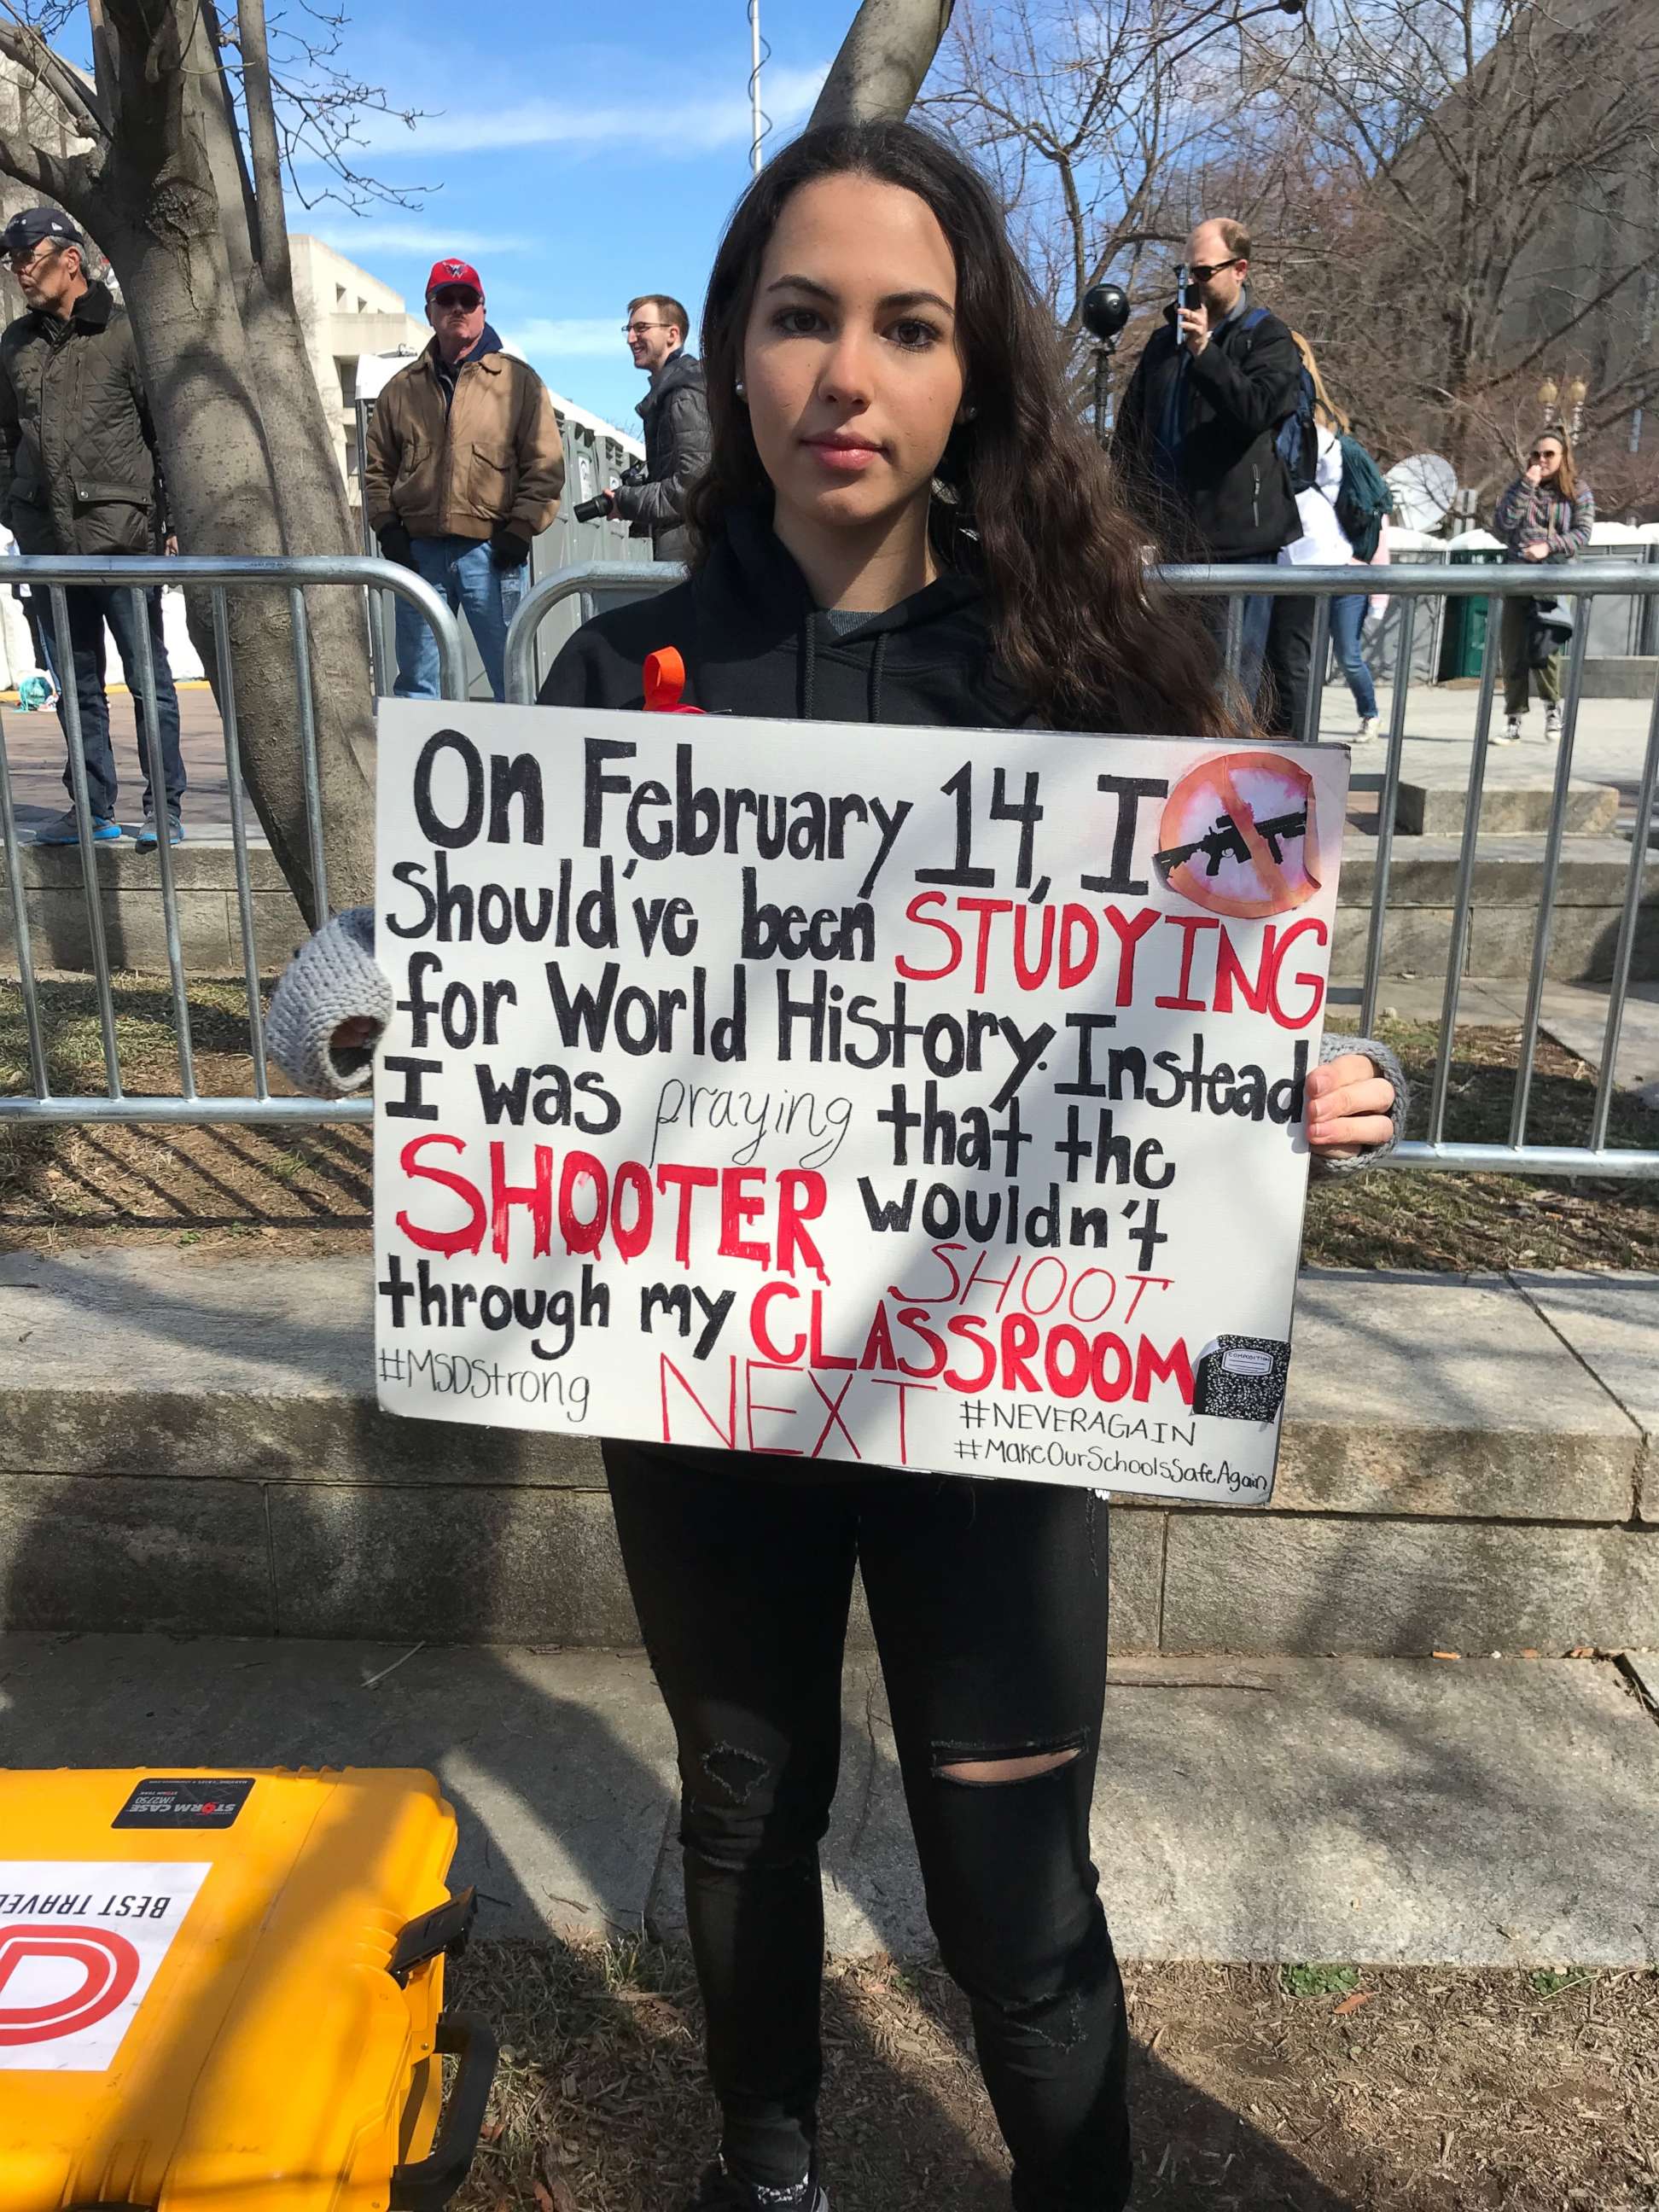 PHOTO: Parkland survivor Zoe Gordon, a sophomore at Marjory Stoneman Douglas High School, holds up a sign at the March of Our Lives event in Washington D.C., March 24, 2018.